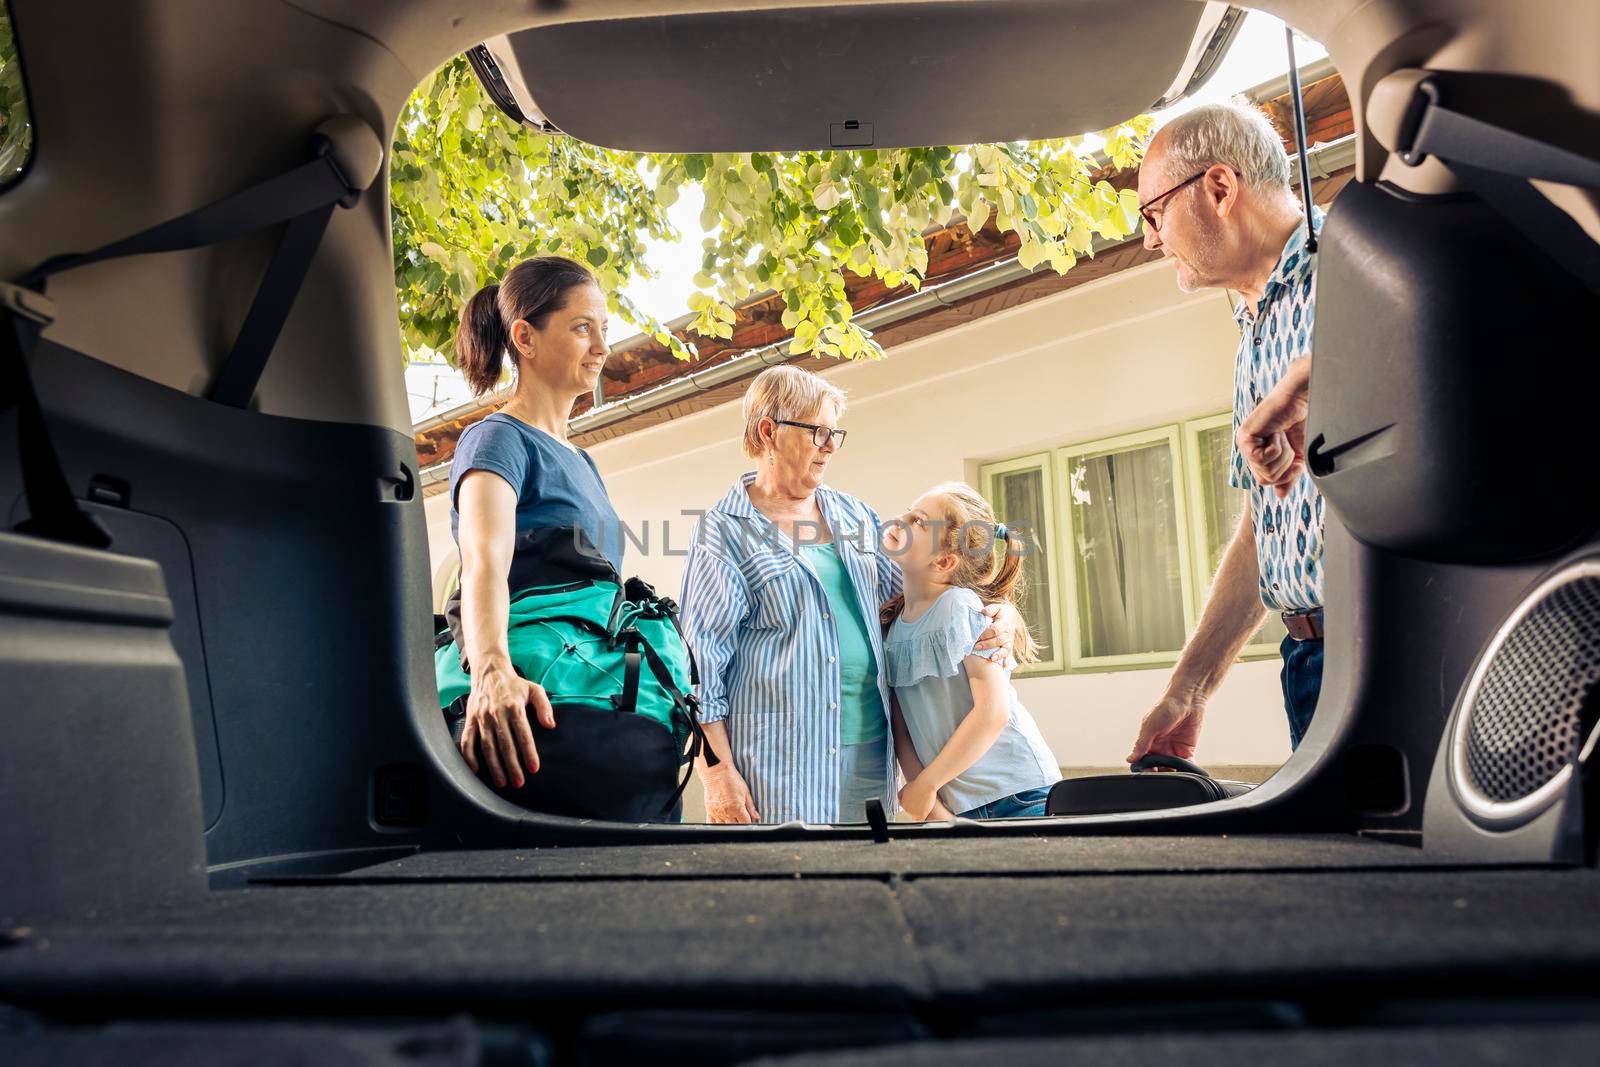 European family going on summer holiday with luggage and bags, loading baggage in automobile trunk. Little girl with mother and grandparents travelling on vacation trip with vehicle.